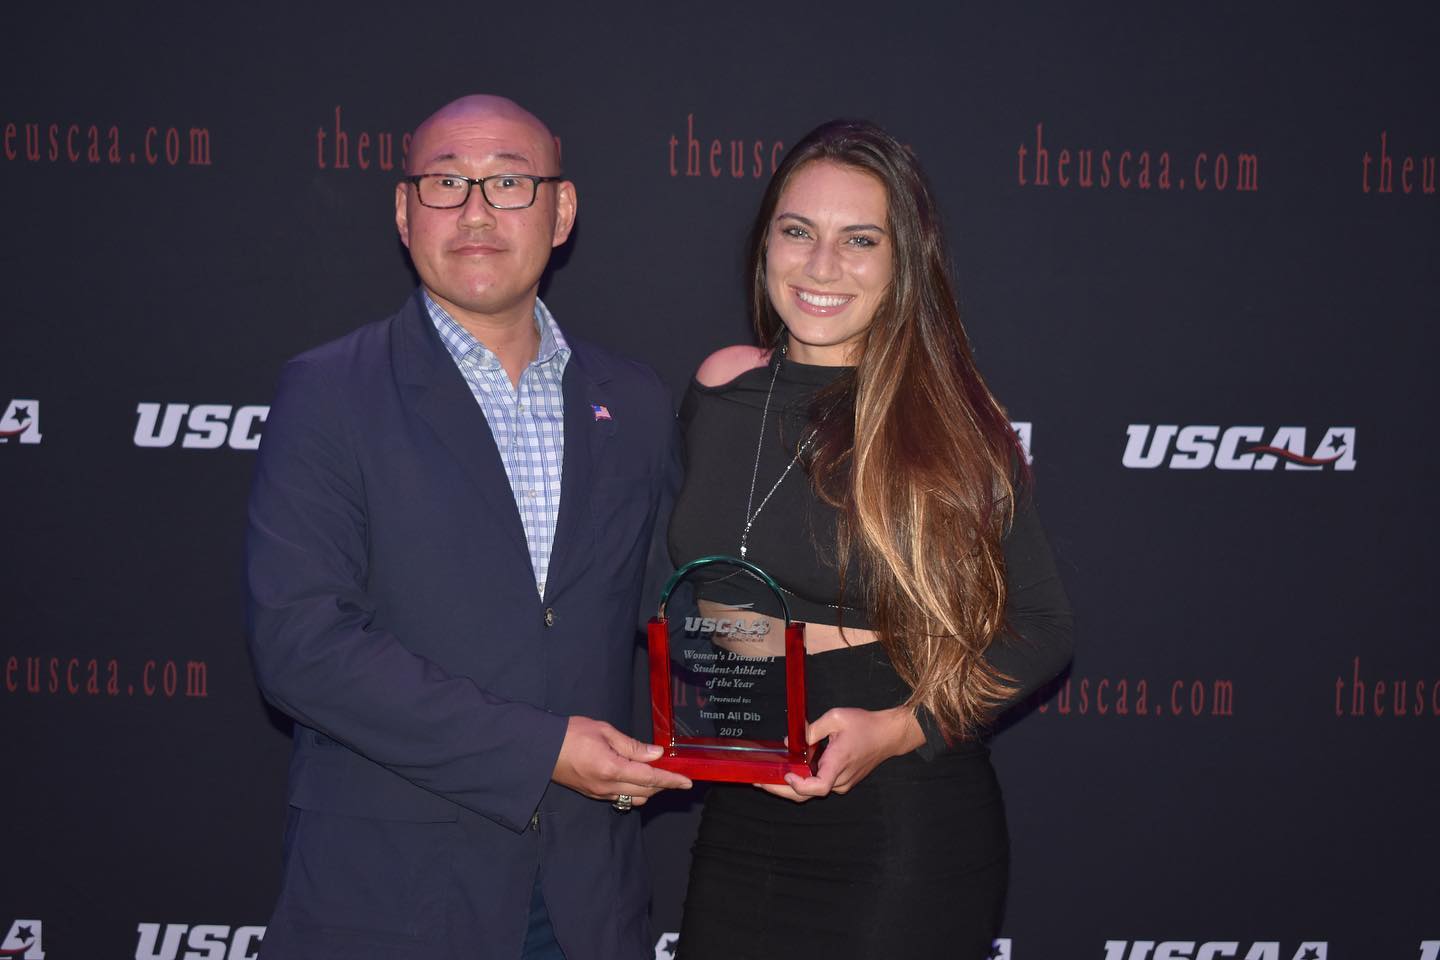 soccer player Iman Ali Dib receiving the award USCAA Women’s Division 1 Student-Athlete of the Year